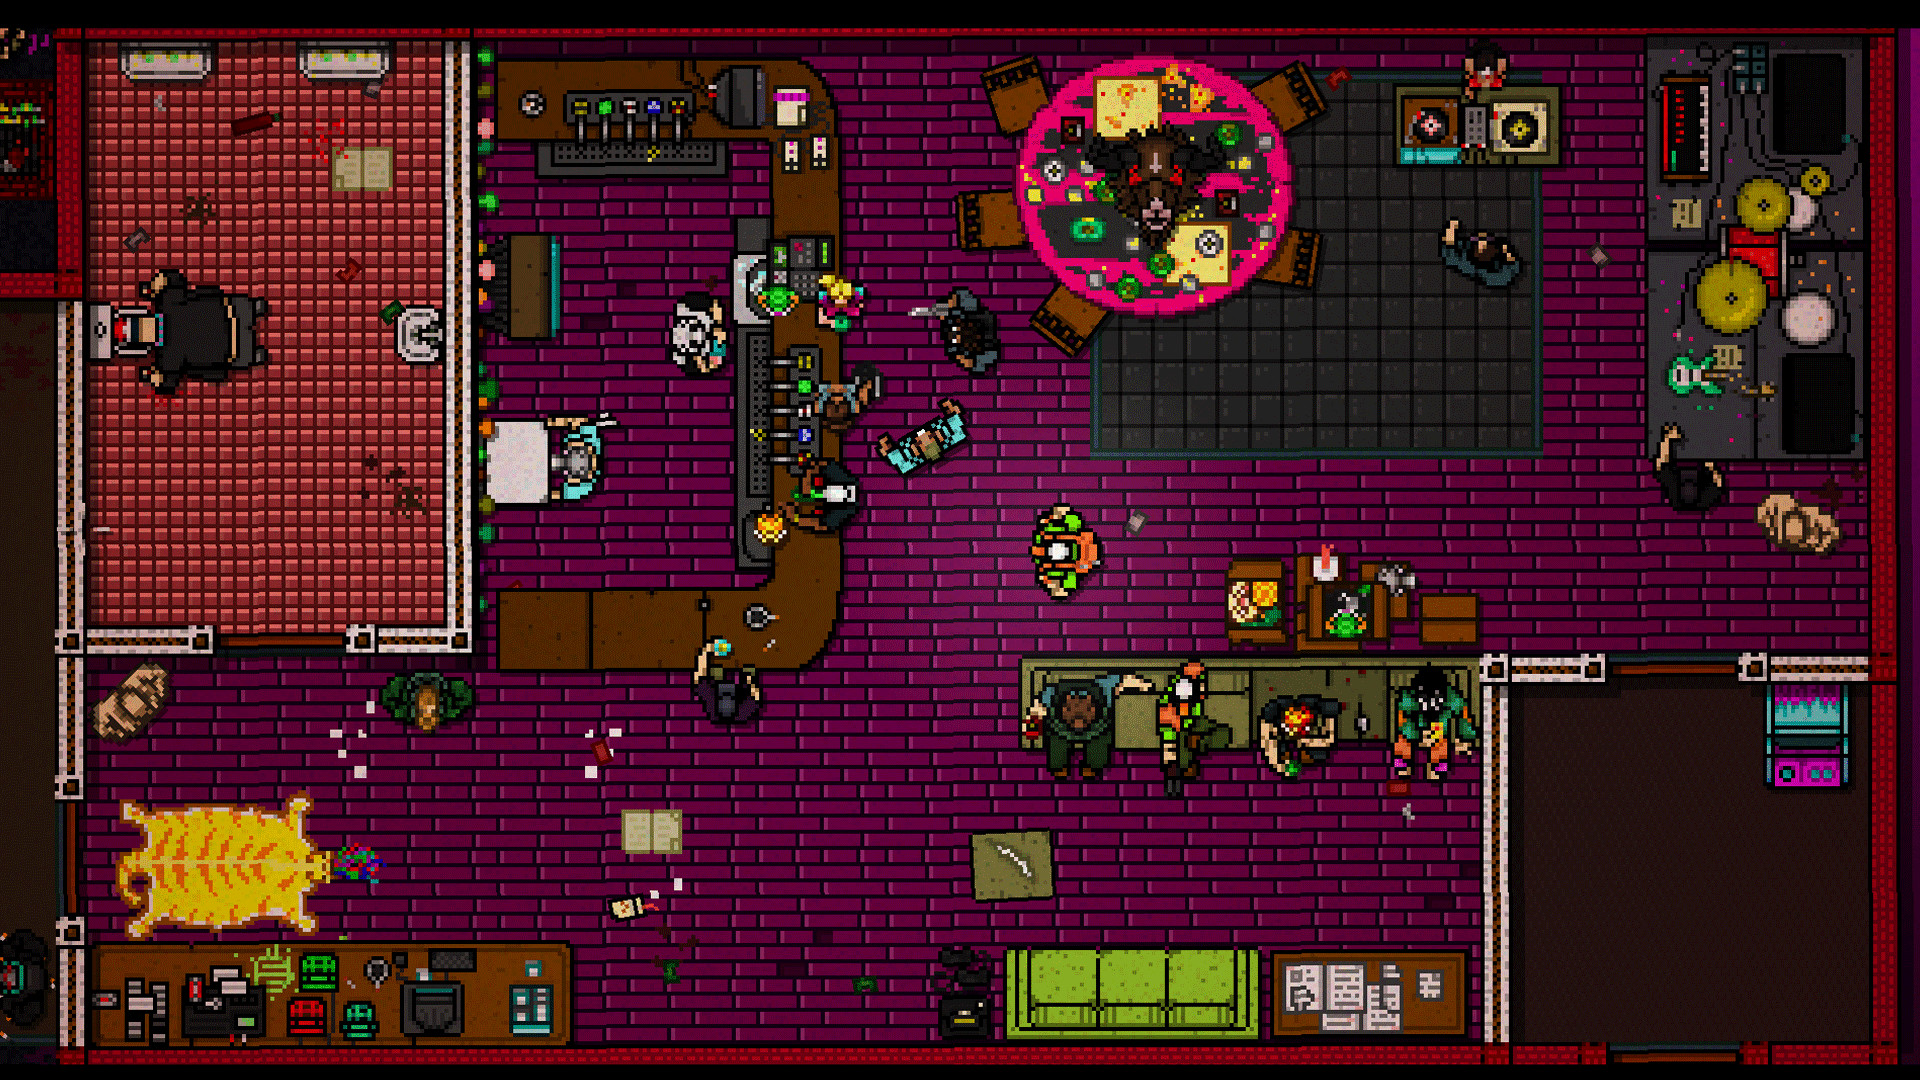 Hotline Miami 2: Wrong Number - Soundtrack Featured Screenshot #1